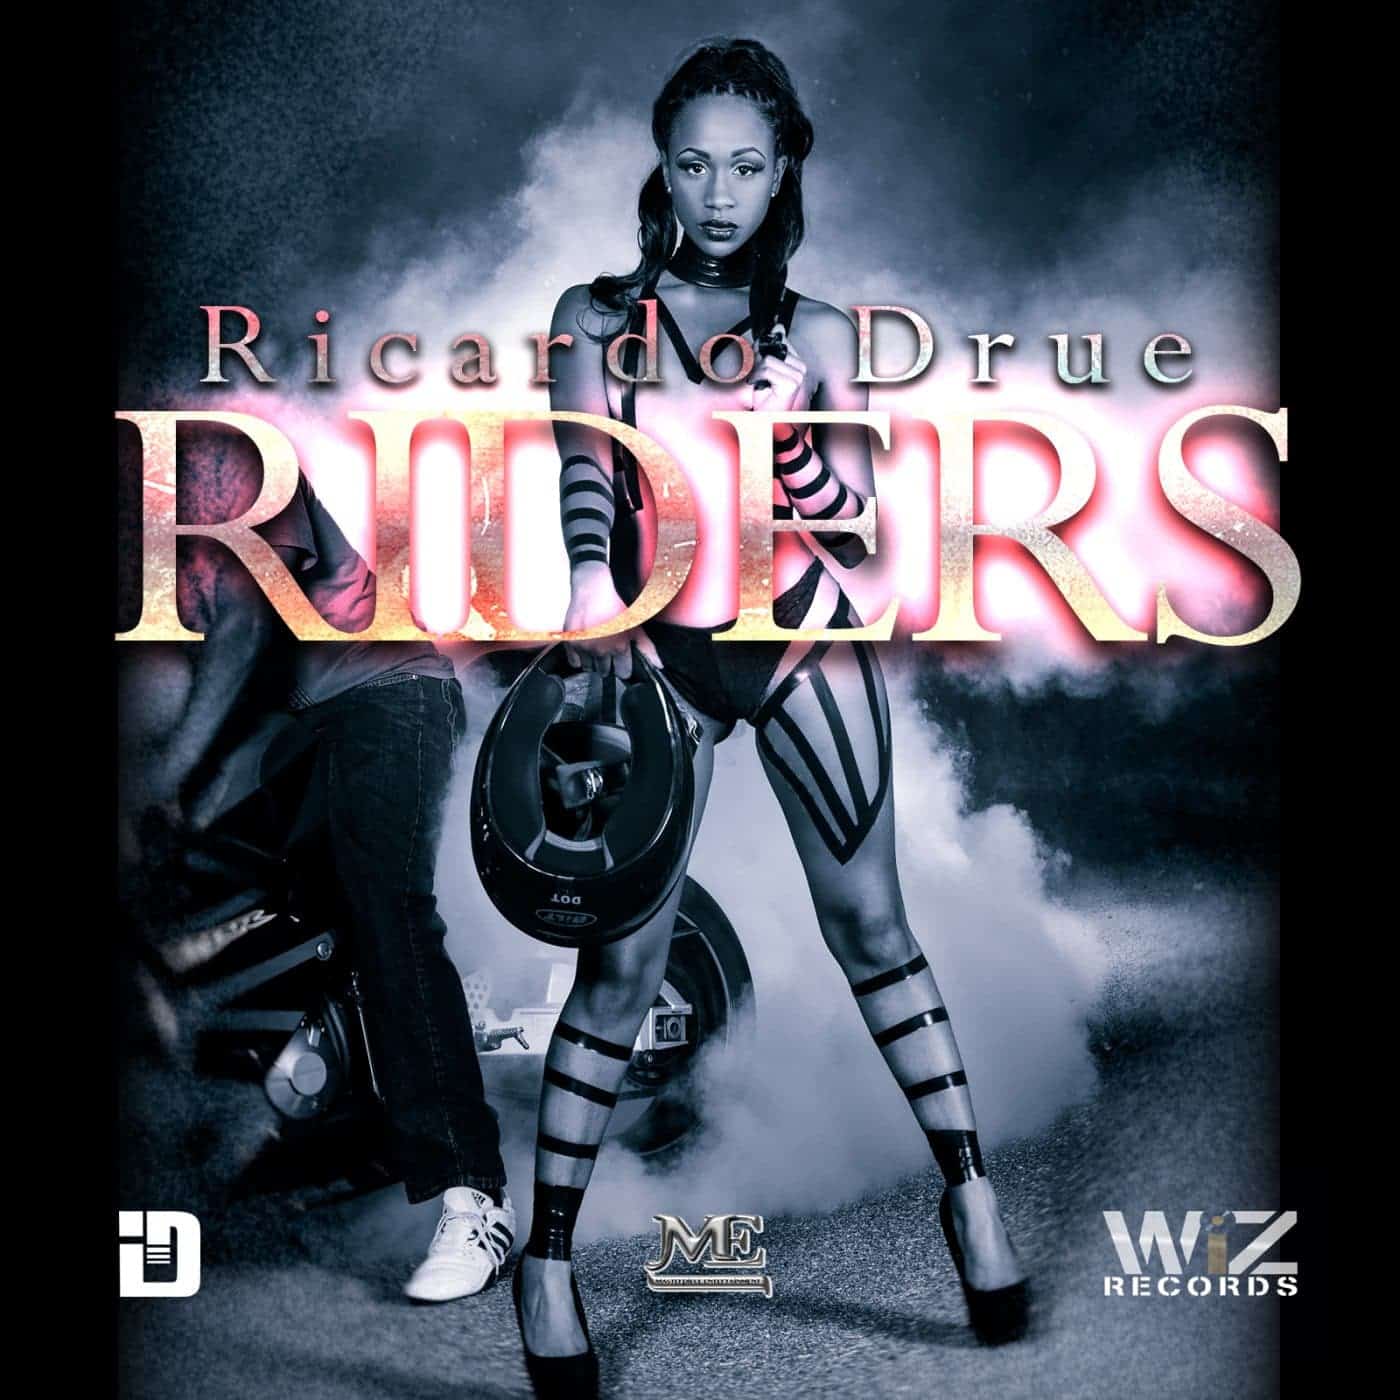 Ricardo Drue - Riders Produced by Mr Roots for Wiz Records